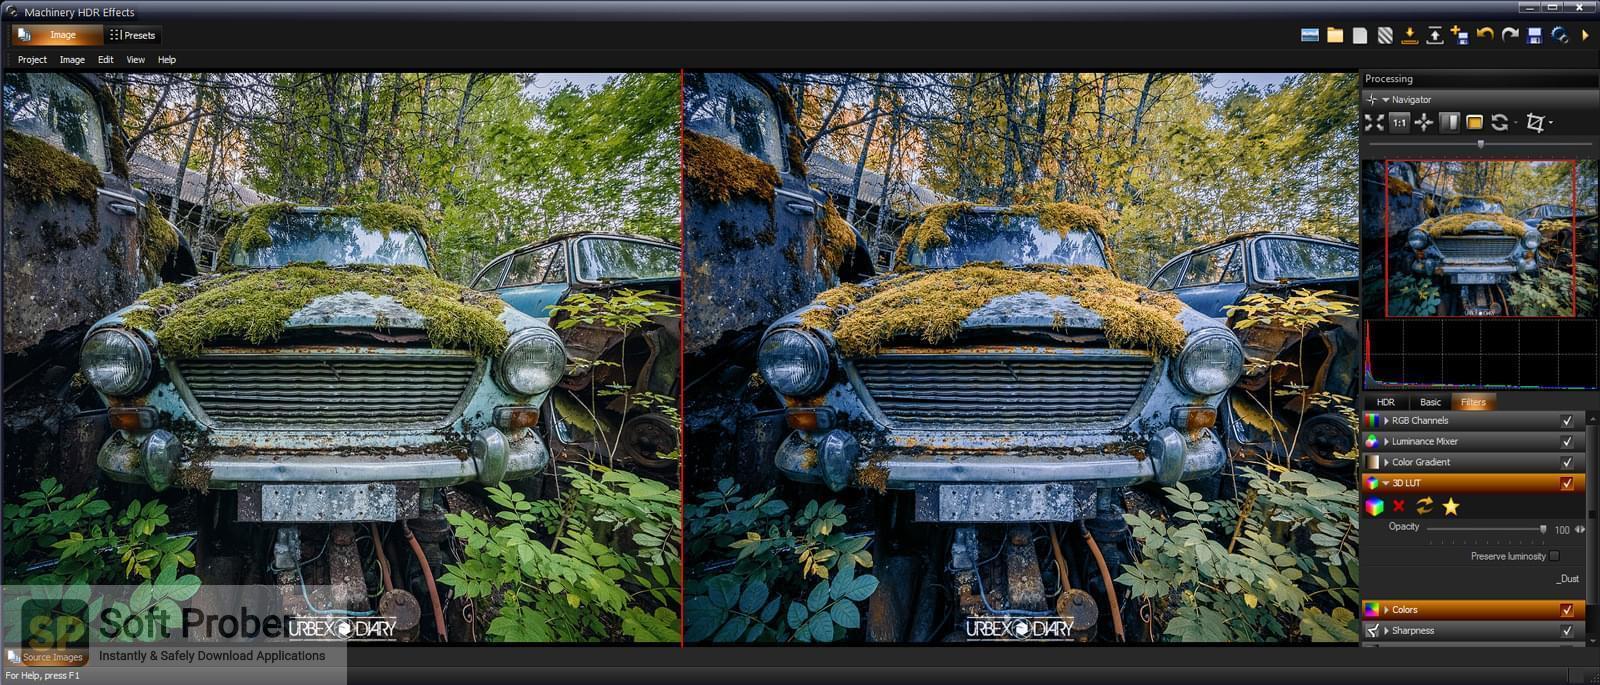 Machinery HDR Effects 3.1.4 download the new version for mac